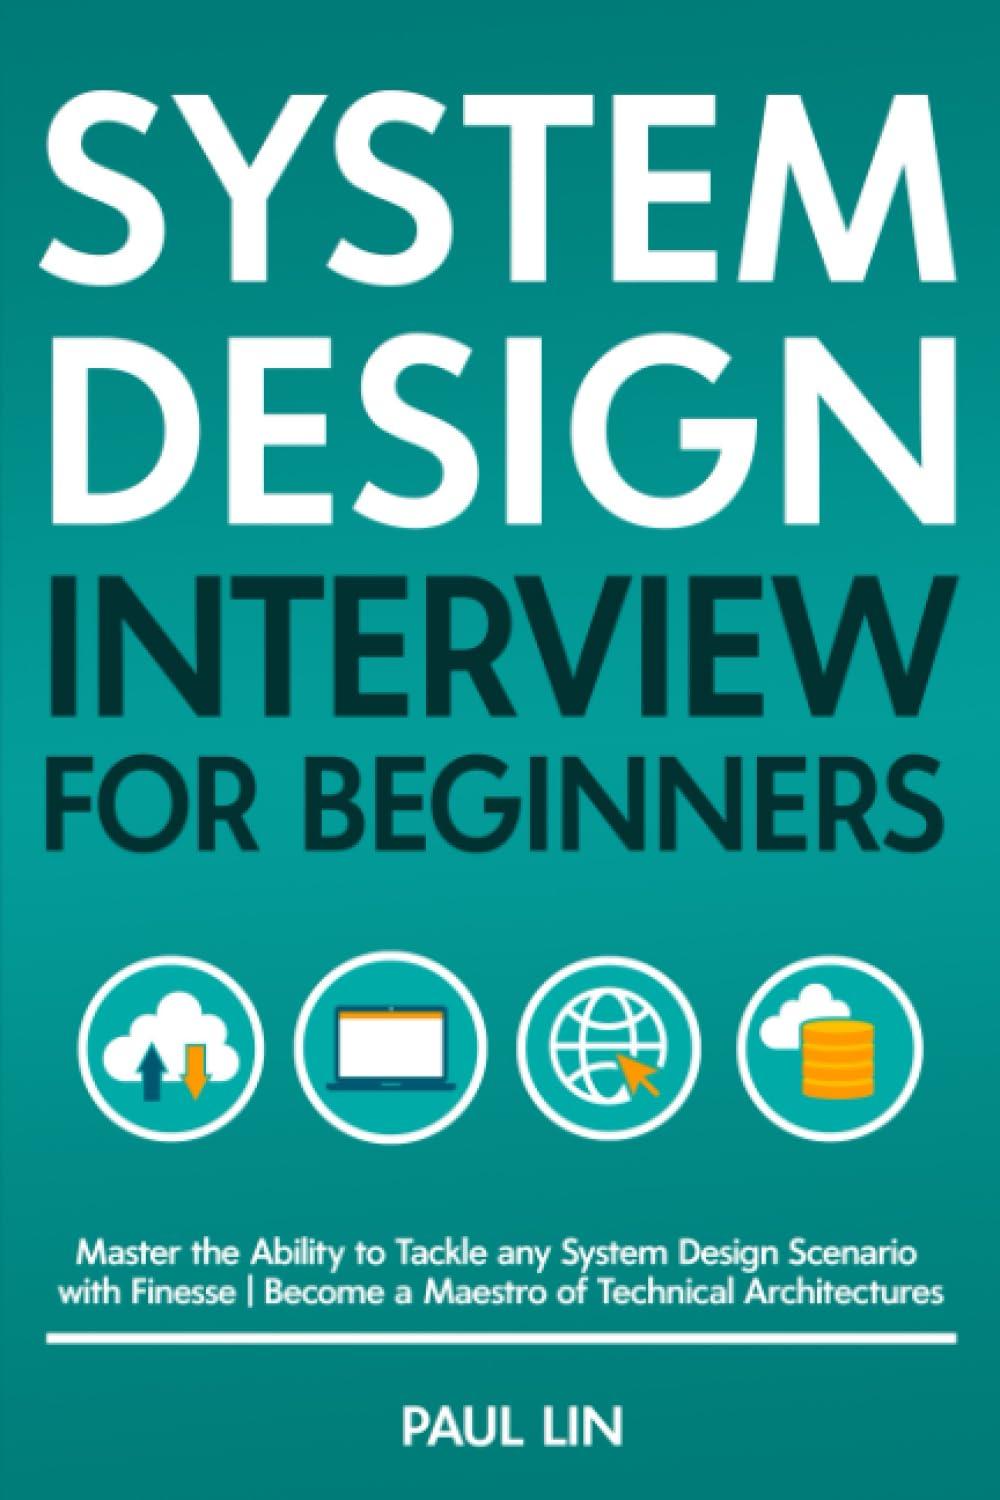 system design interview for beginners master the ability to tackle any system design scenario with finesse